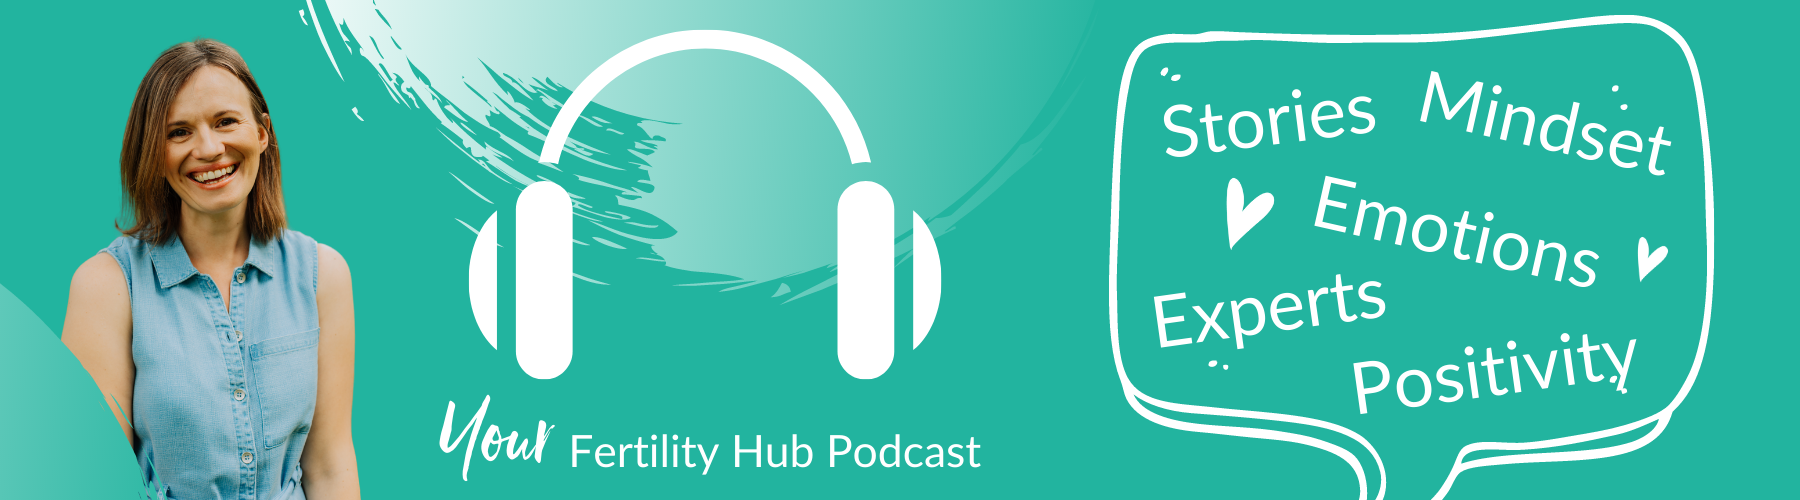 Your Fertility Hub Podcast Listing Cover Image